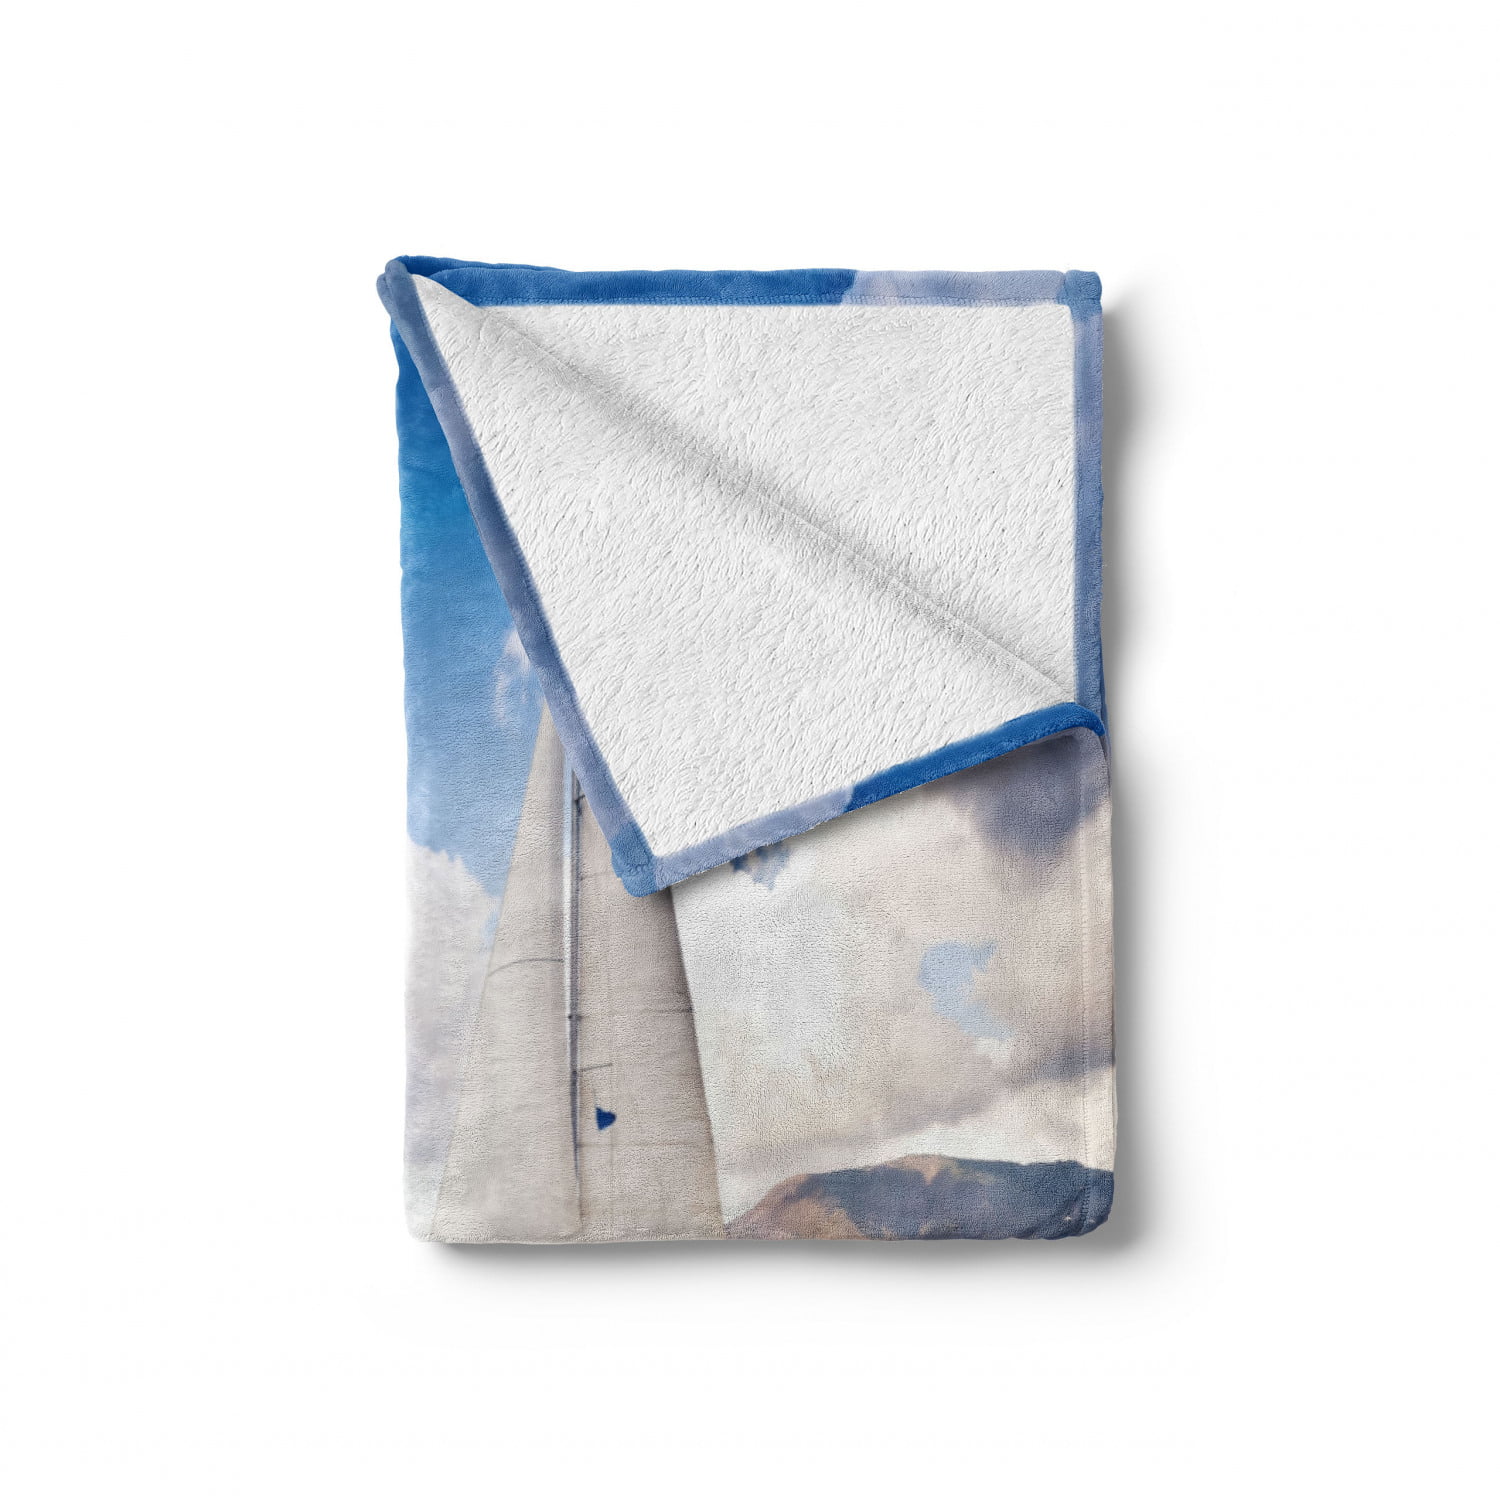 60 x 80 Ambesonne Nautical Soft Flannel Fleece Throw Blanket Blue and White Sailing Boat and Sails on Sea Waves Cloudy Sky Adventure Photo Print Cozy Plush for Indoor and Outdoor Use